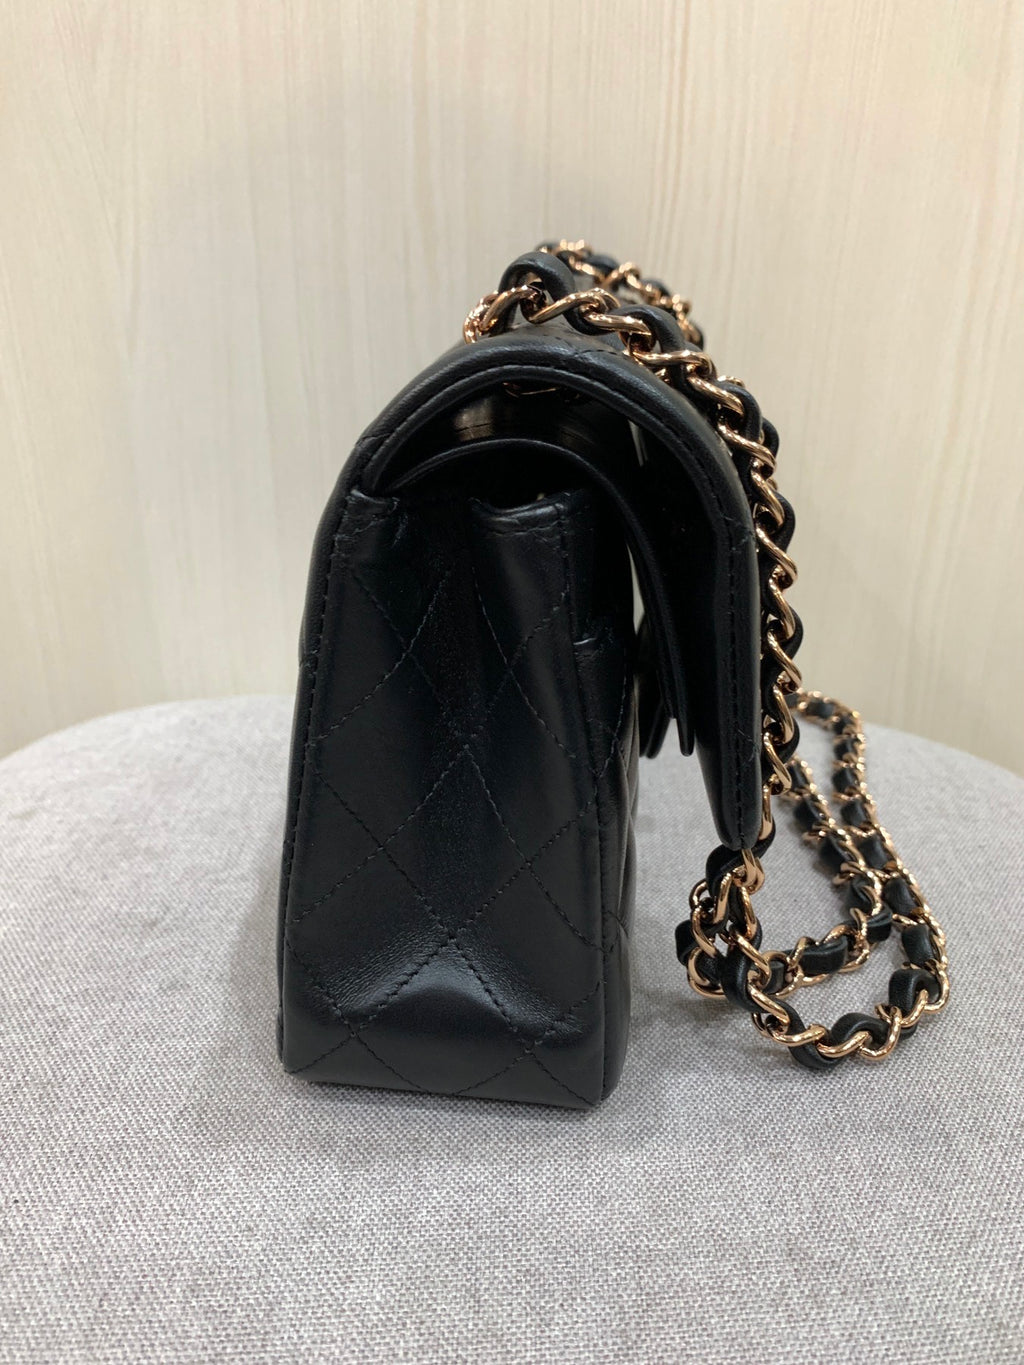 Chanel Mini Classic Flap Bag in Black and Silver Hardware